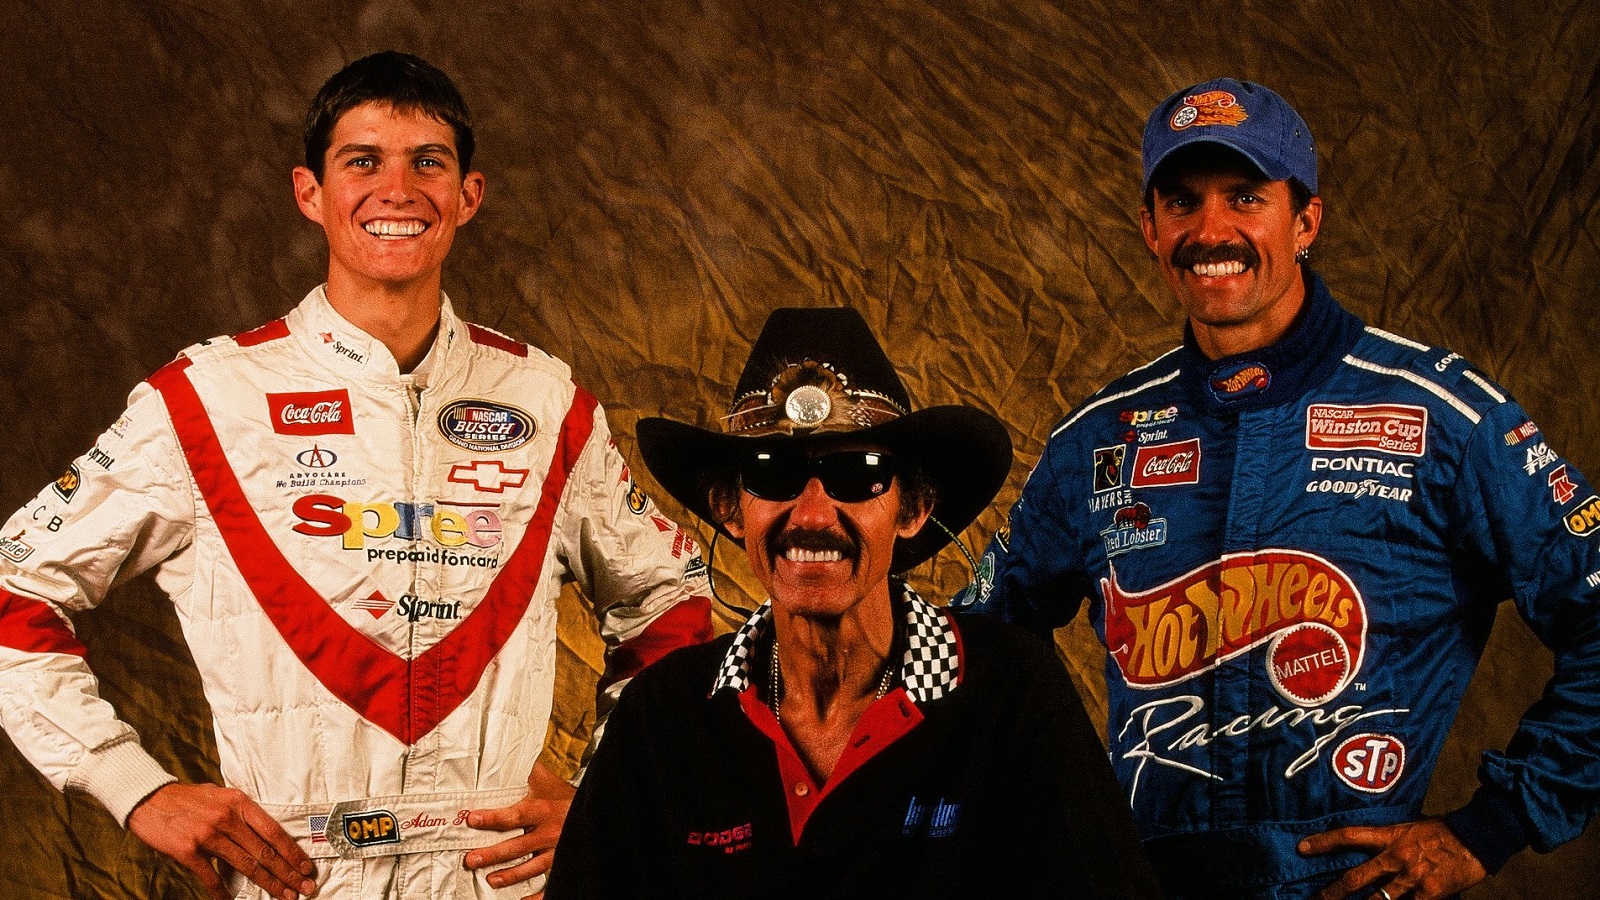 Adam, Richard, and Kyle Petty pose for a photo on Sept. 13, 1999, in Level Cross, North Carolina.